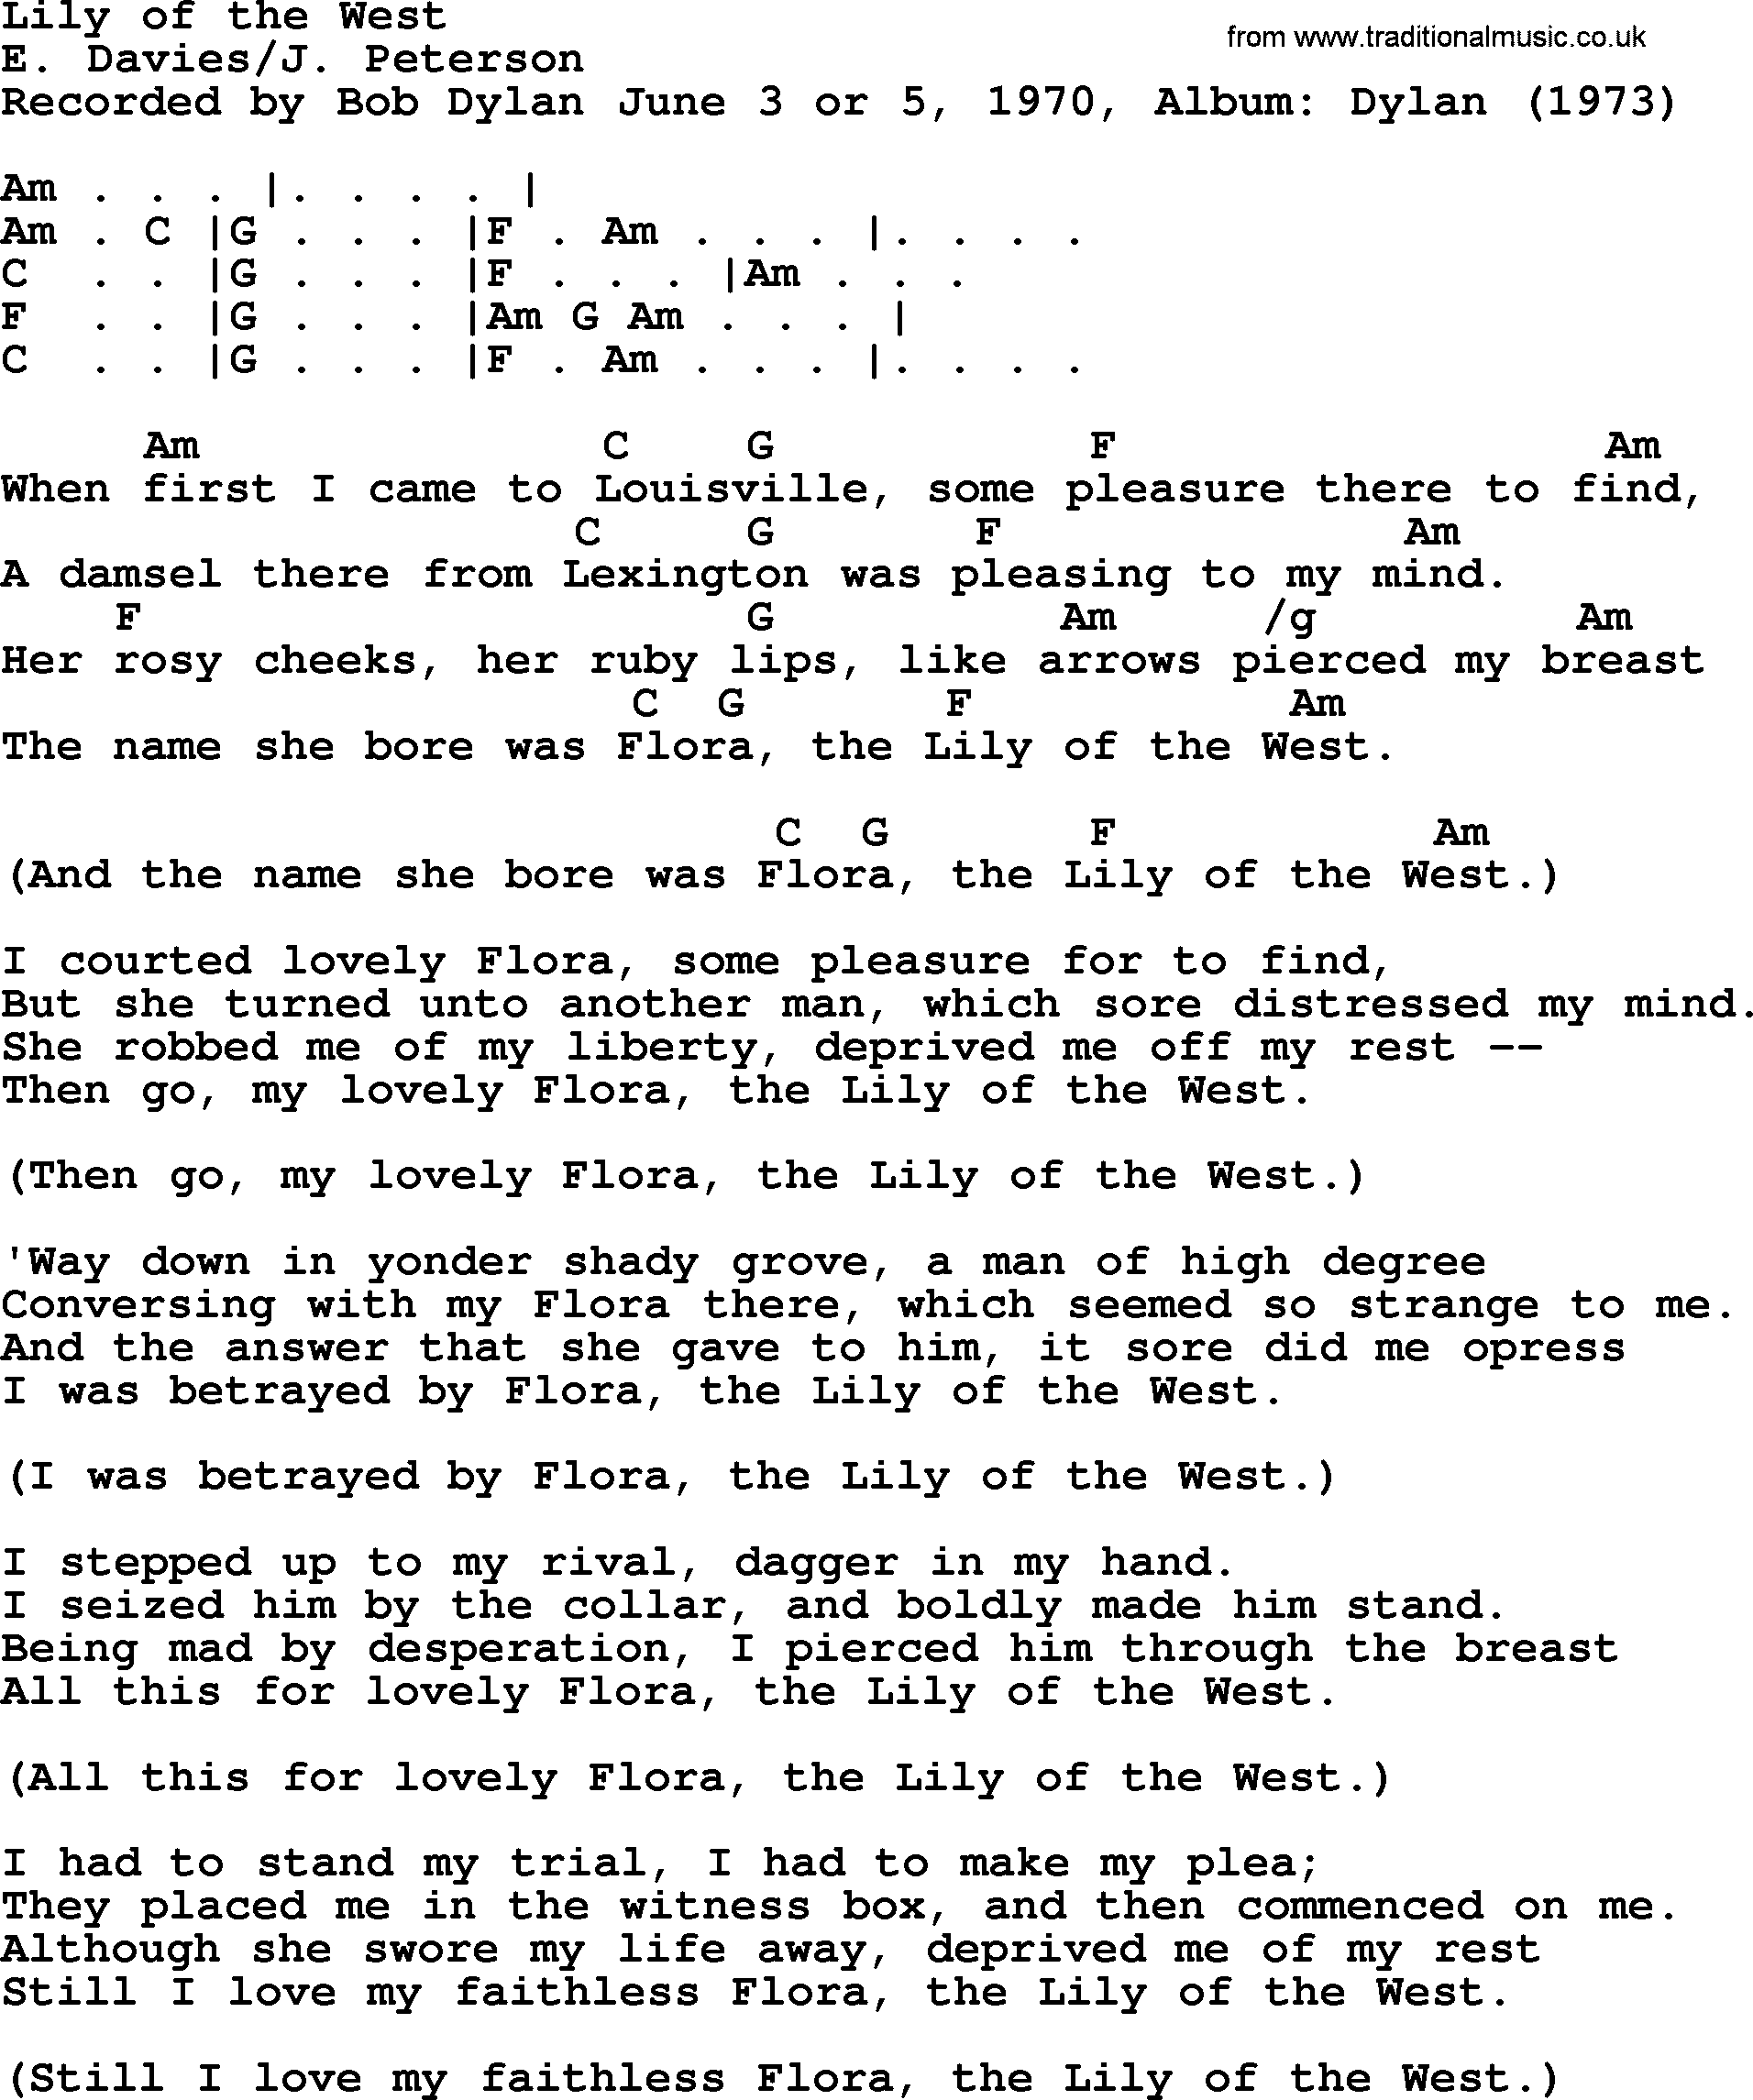 Bob Dylan song, lyrics with chords - Lily of the West